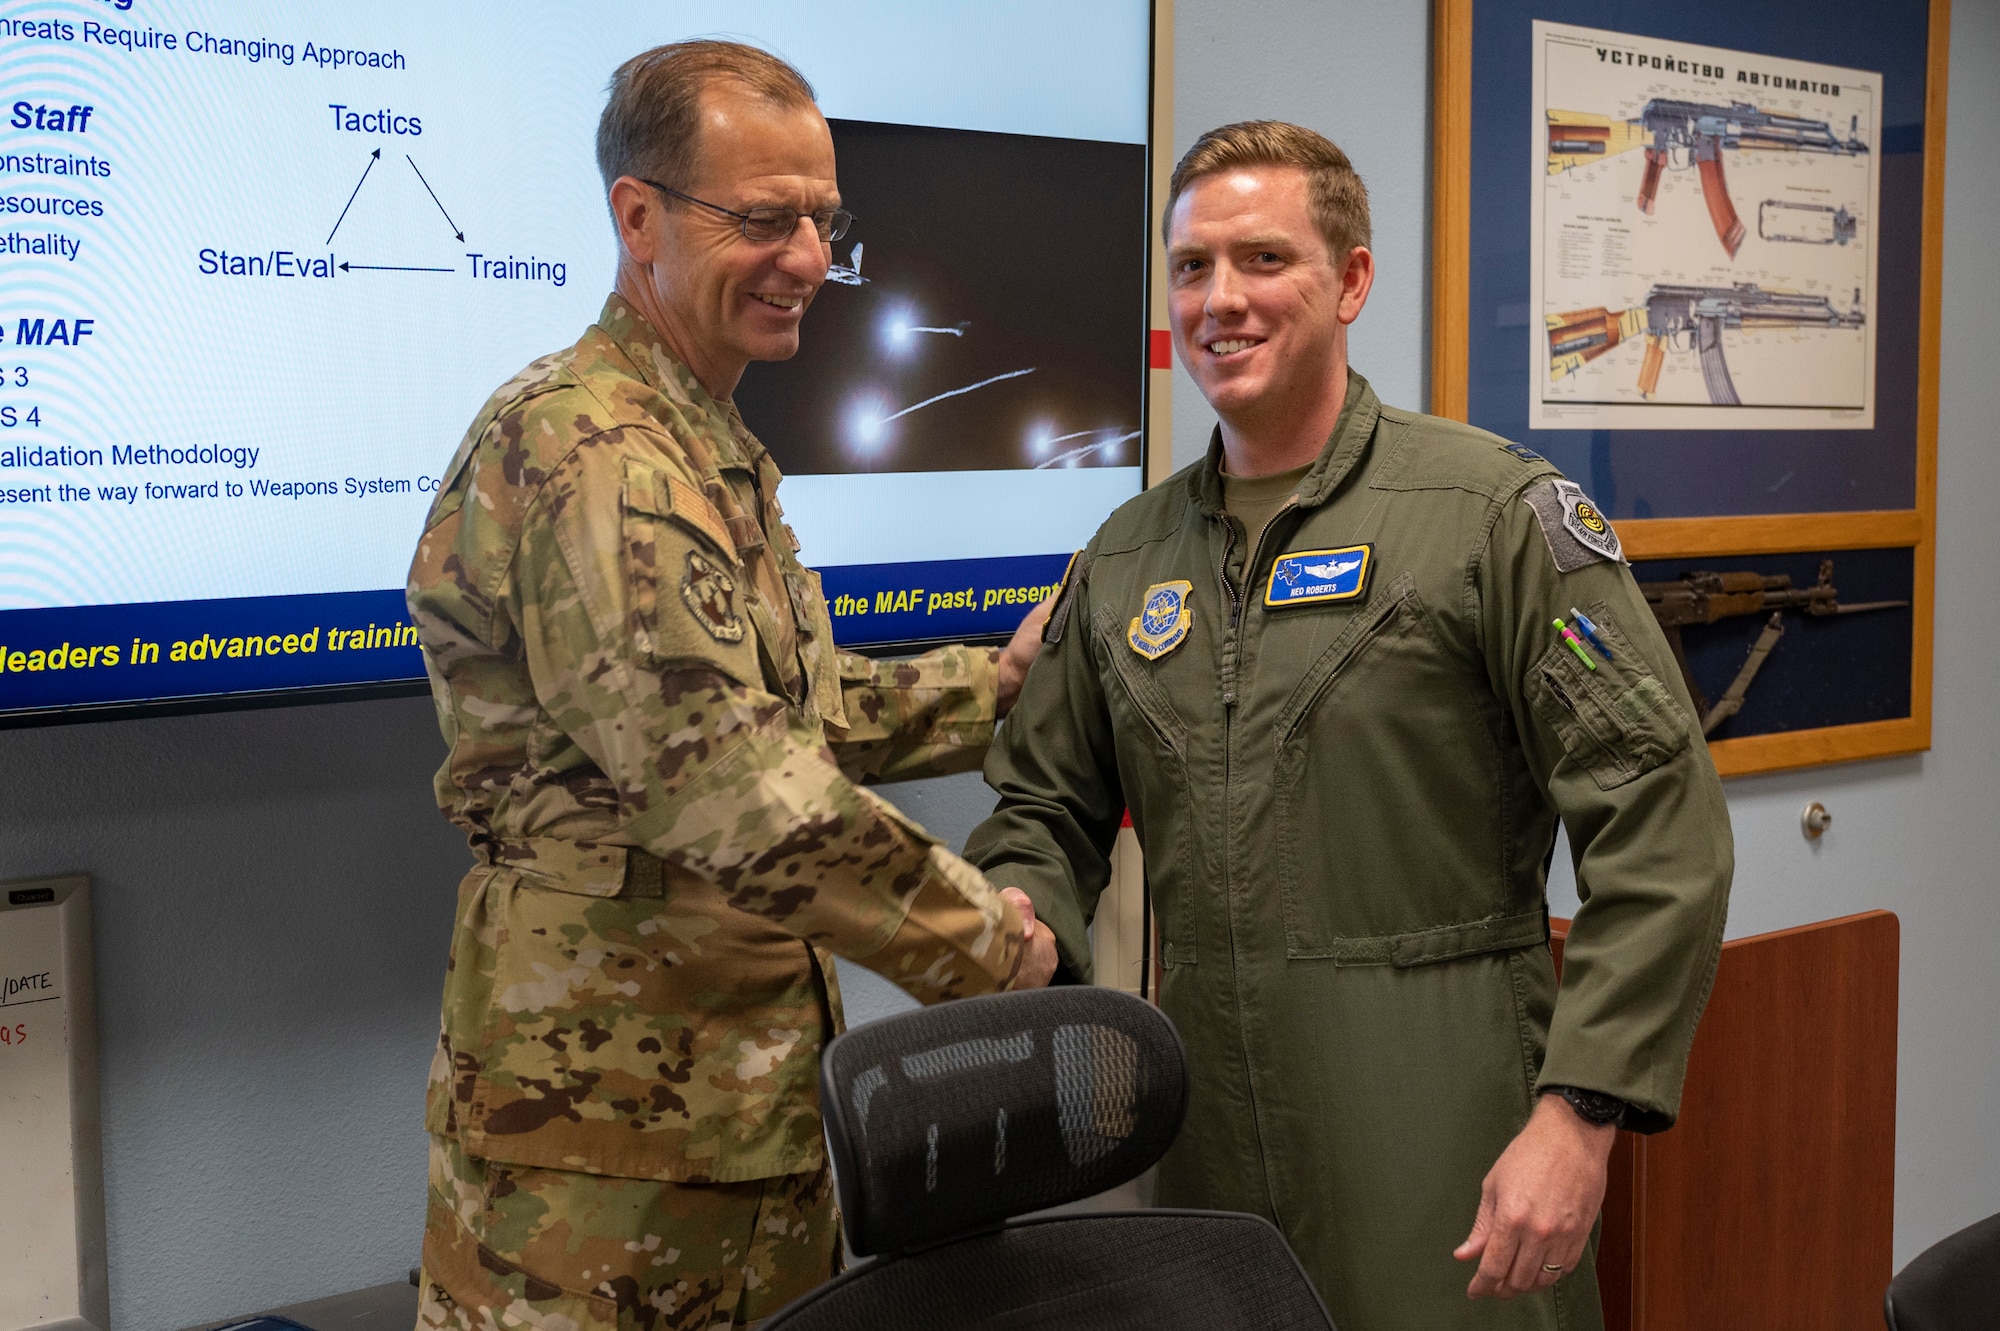 Maj. Gen. Corey Martin, 18th Air Force commander, coins Capt. Nathaniel Roberts, 40th Airlift Squadron C-130J Super Hercules pilot, at Dyess Air Force Base, Texas, Aug. 25, 2022. The 18th AF is responsible for ensuring readiness and sustainment of approximately 36,000 active duty, Reserve and civilian Airmen. (U.S. Air Force photo by Senior Airman Josiah Brown)